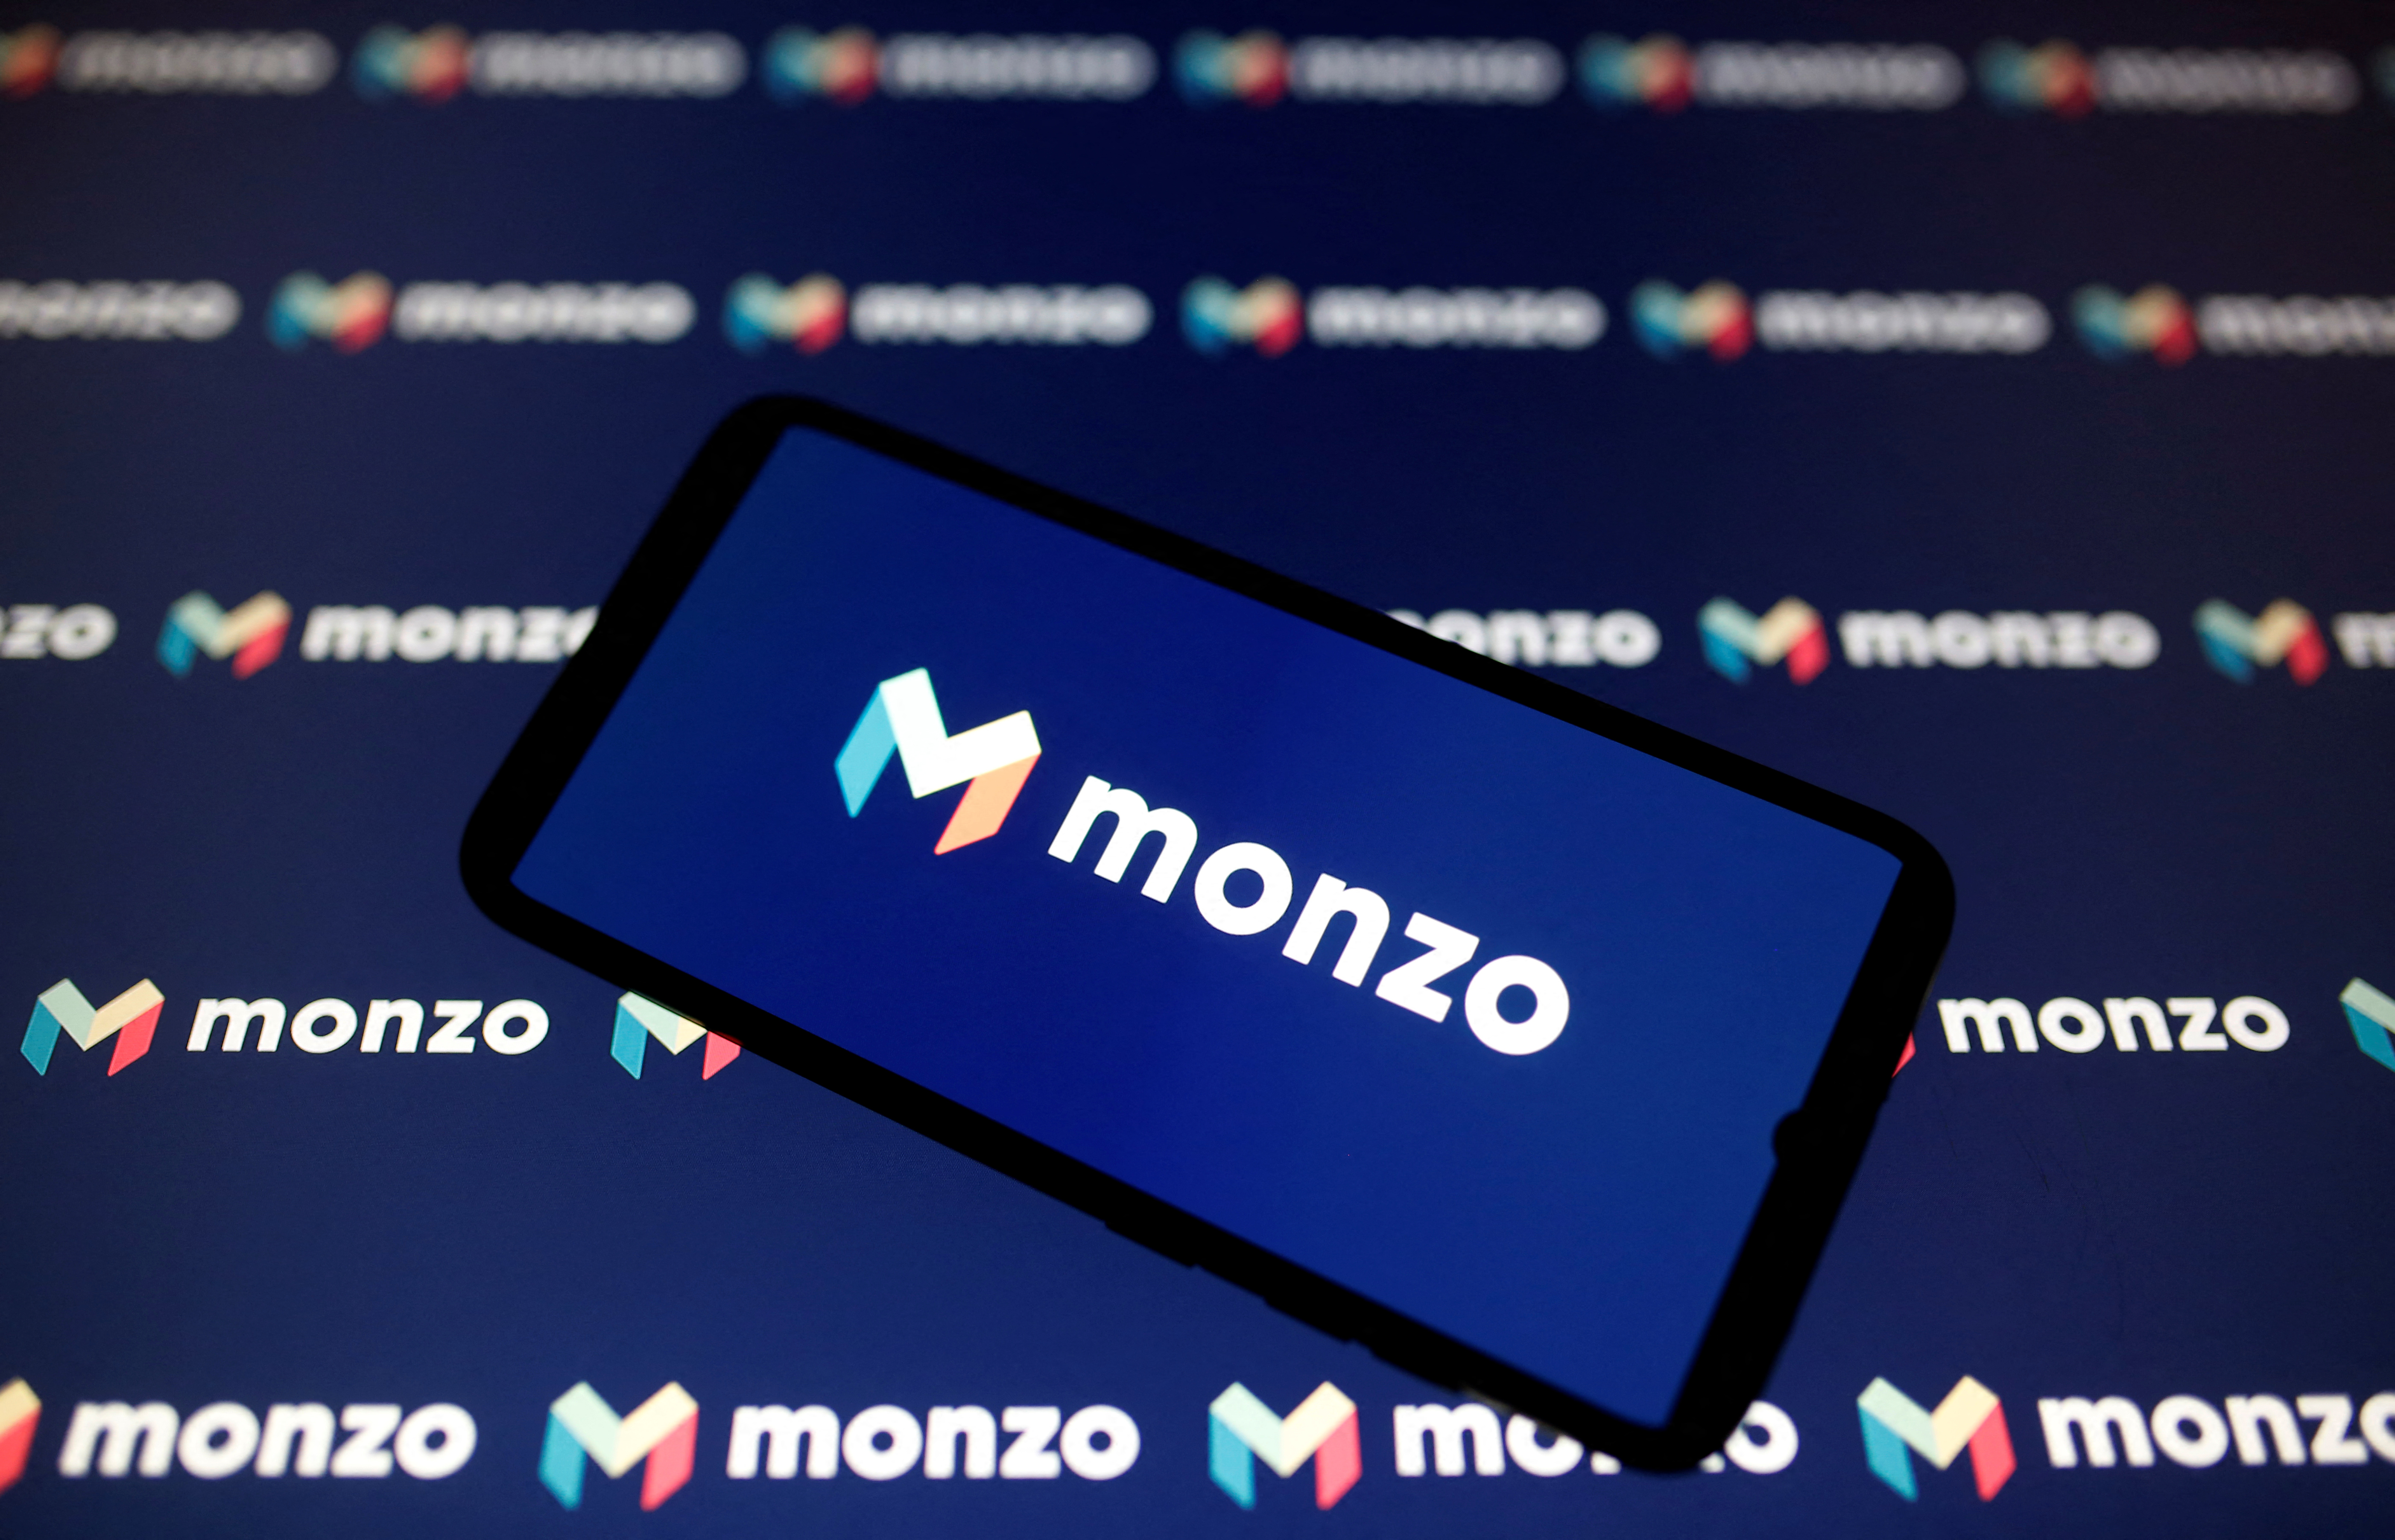 A smartphone displays a Monzo logo in this illustration